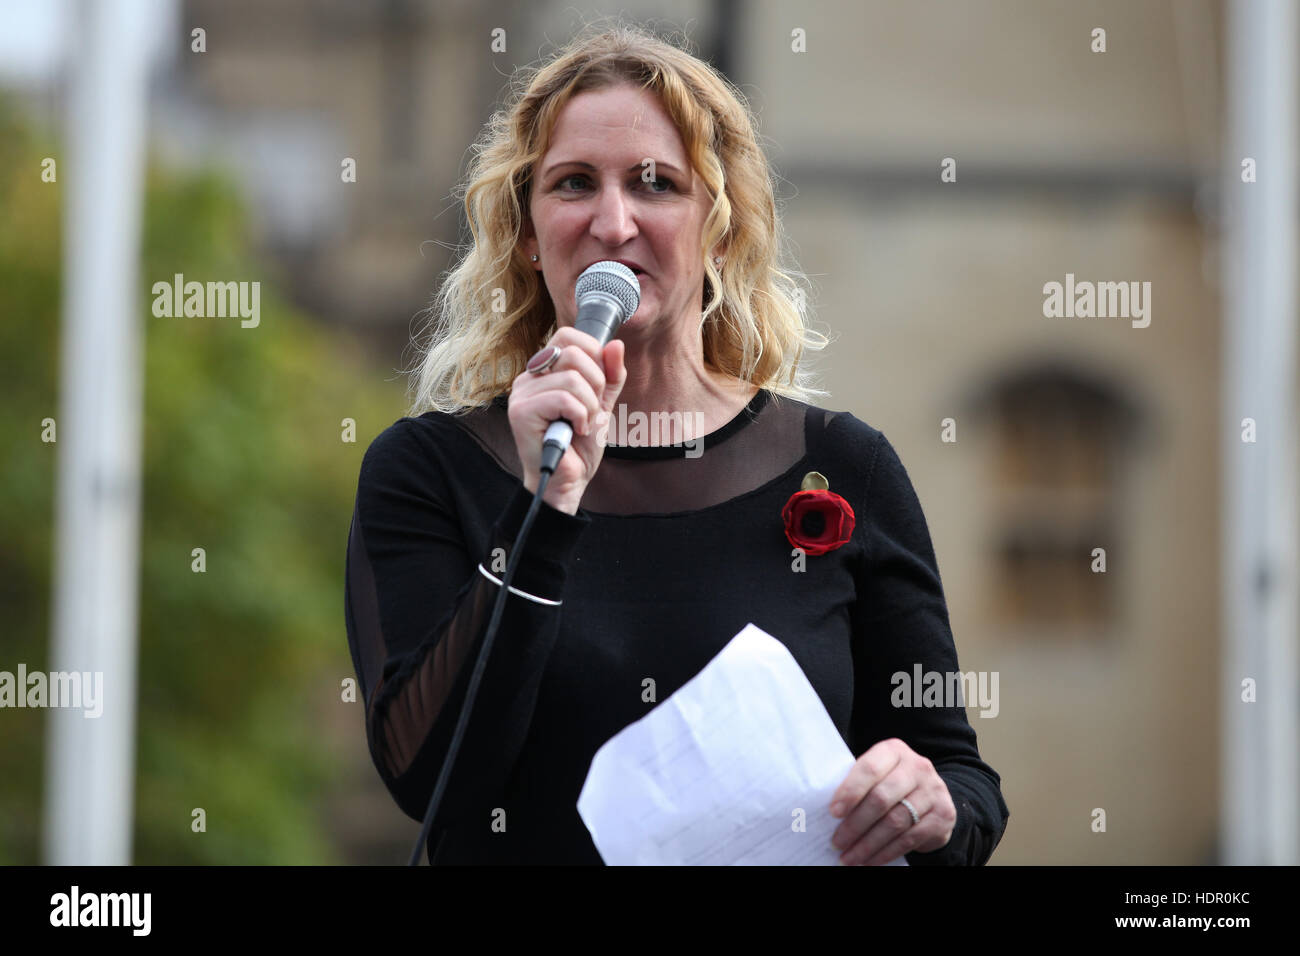 Former and serving members of the armed forces take part in a rally in support of support of Sgt Alexander Blackman, also known as 'Marine A', who was given a life sentence after being convicted of murdering a wounded Taliban fighter.  Featuring: Claire B Stock Photo